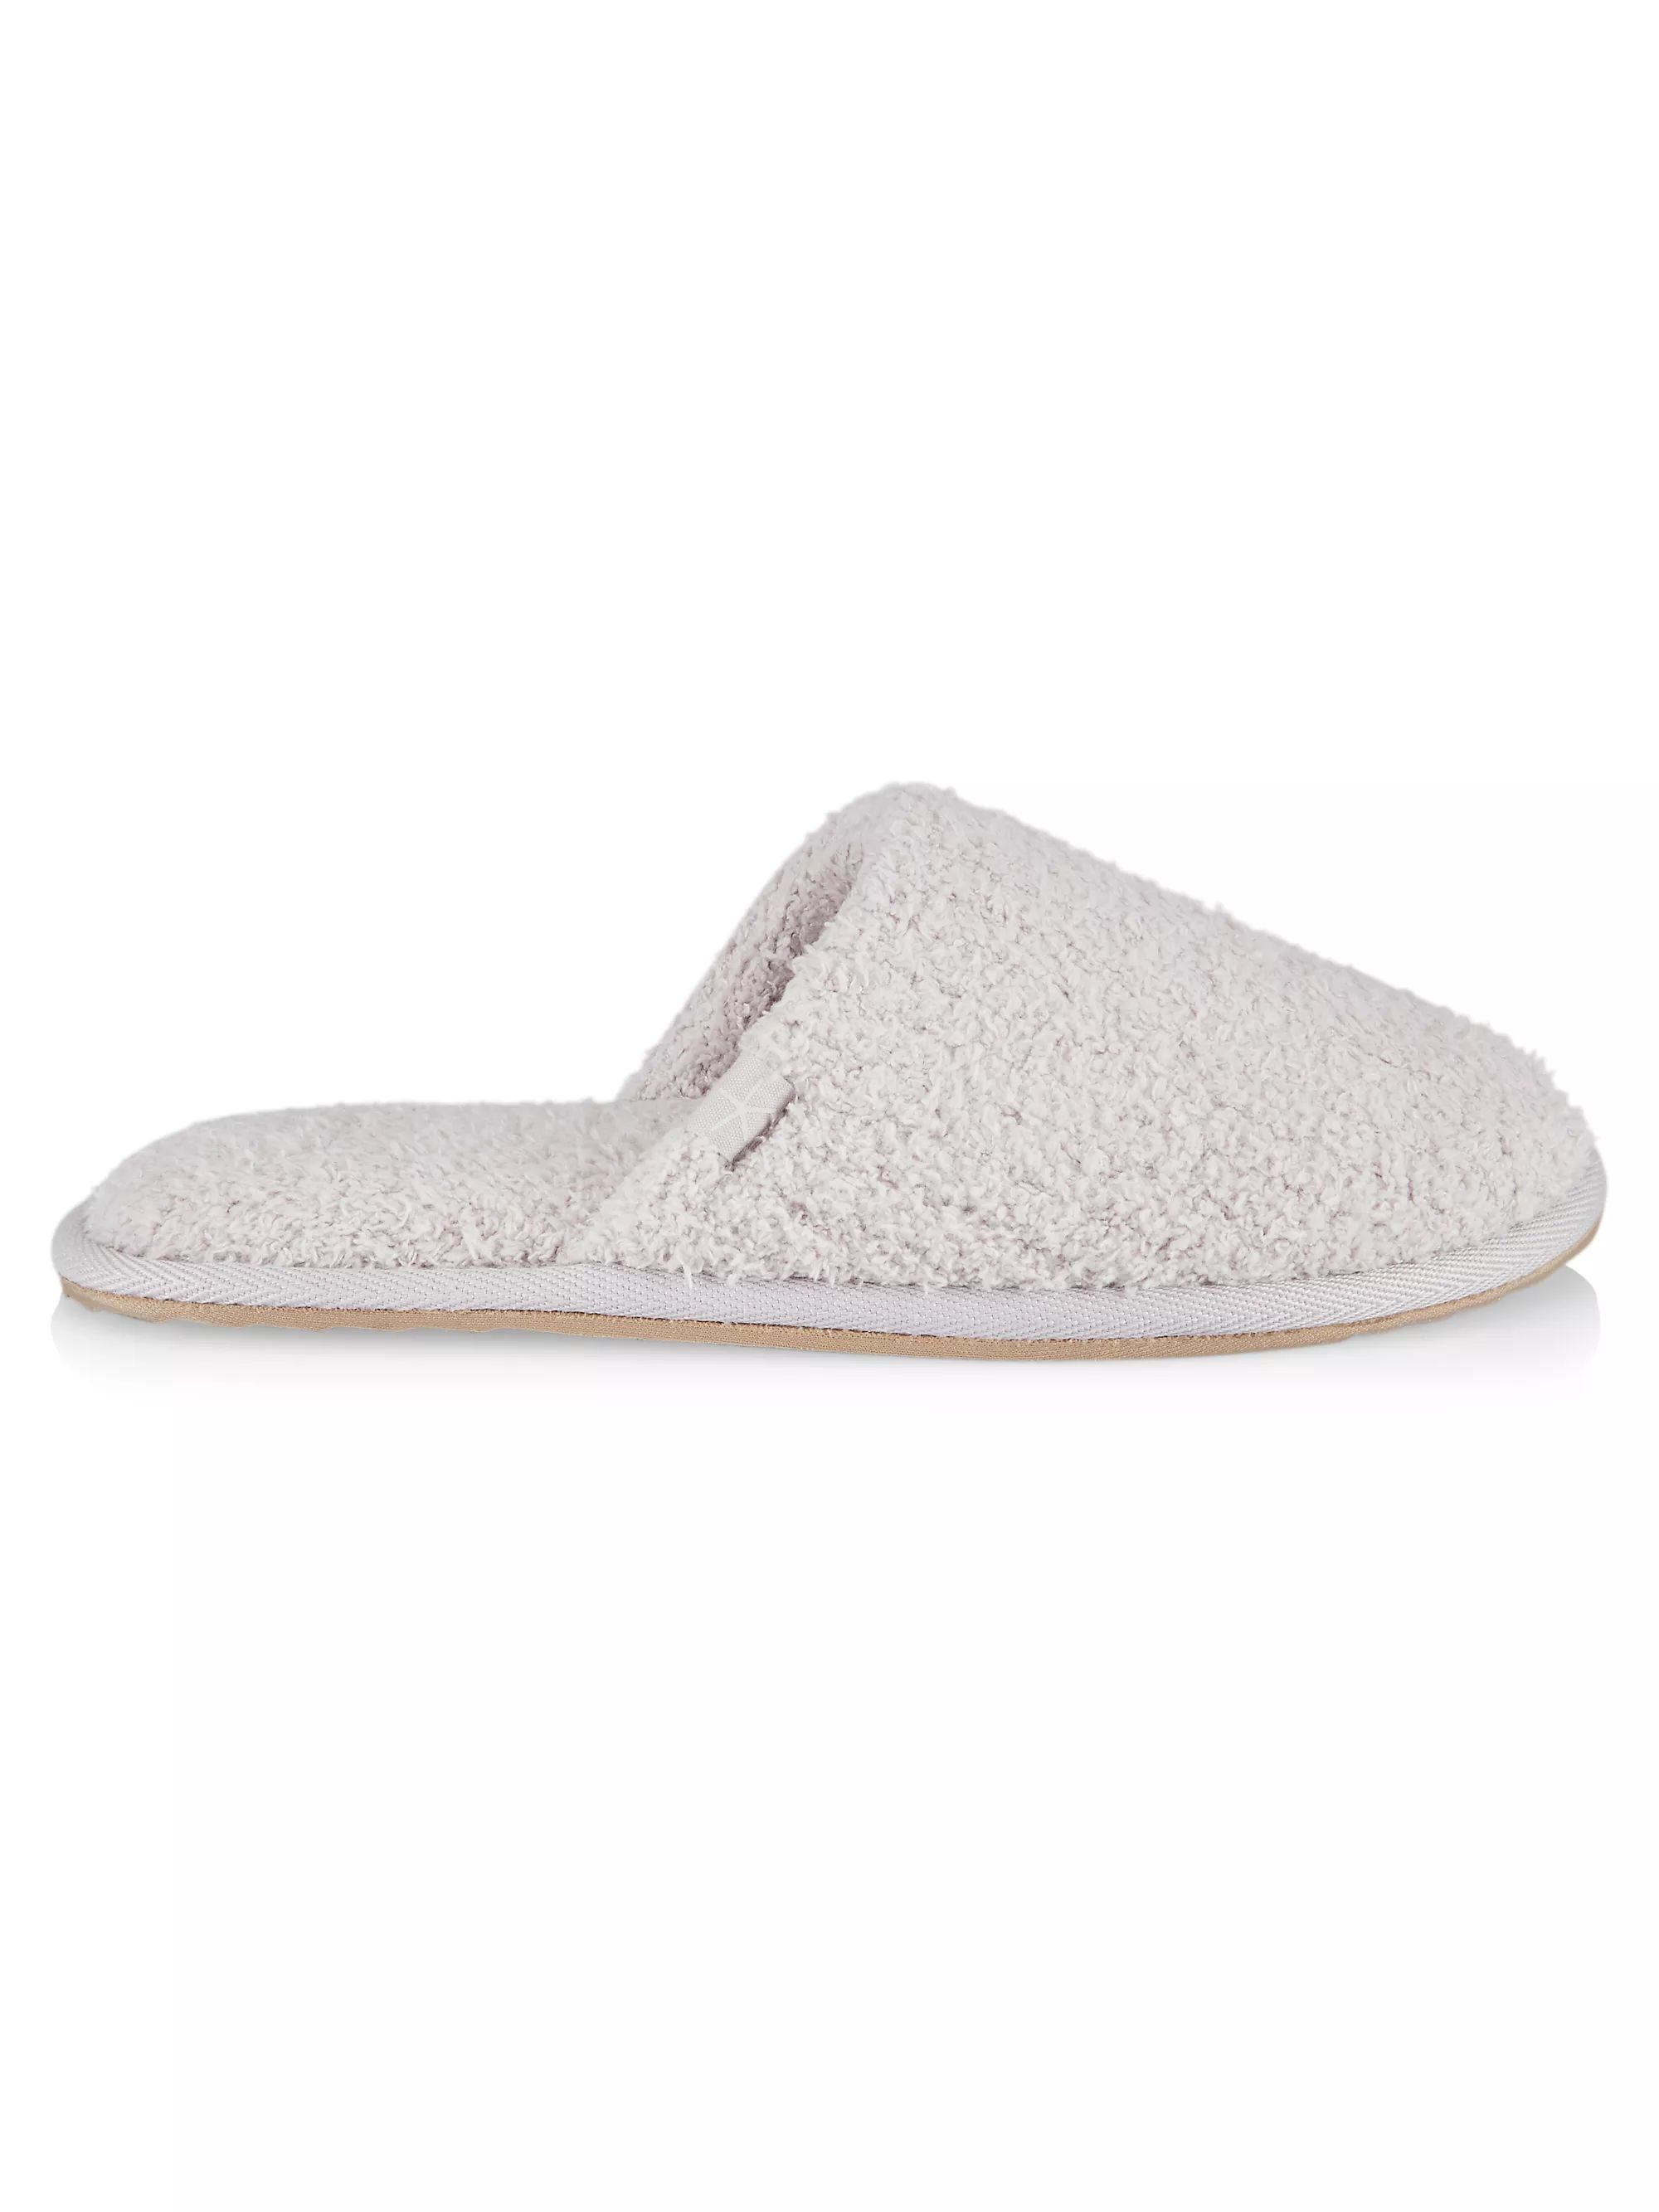 CozyChic Ribbed Slippers | Saks Fifth Avenue